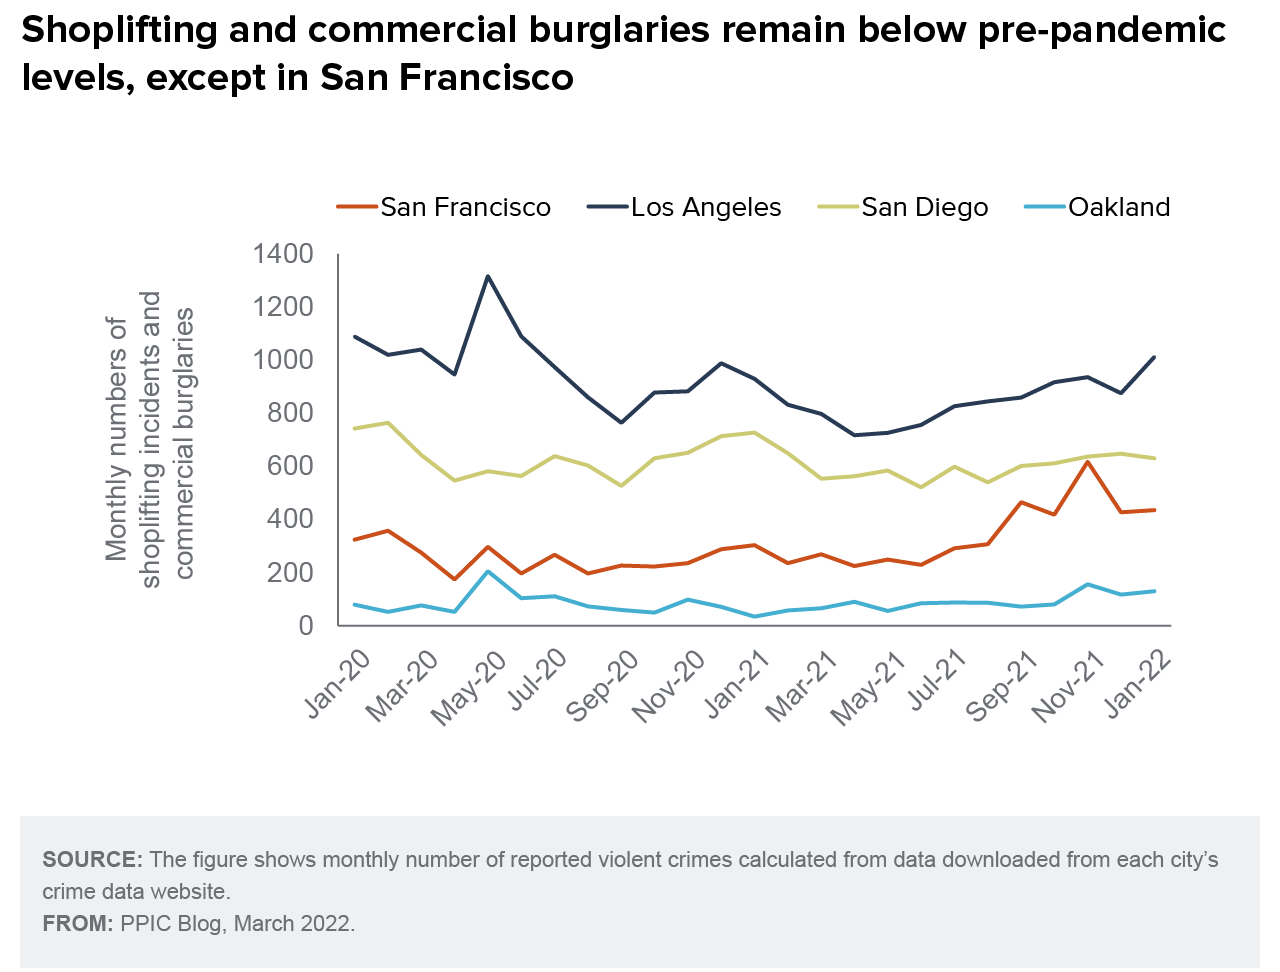 figure - Shoplifting and commercial burglaries remain below pre-pandemic levels, except in San Francisco 